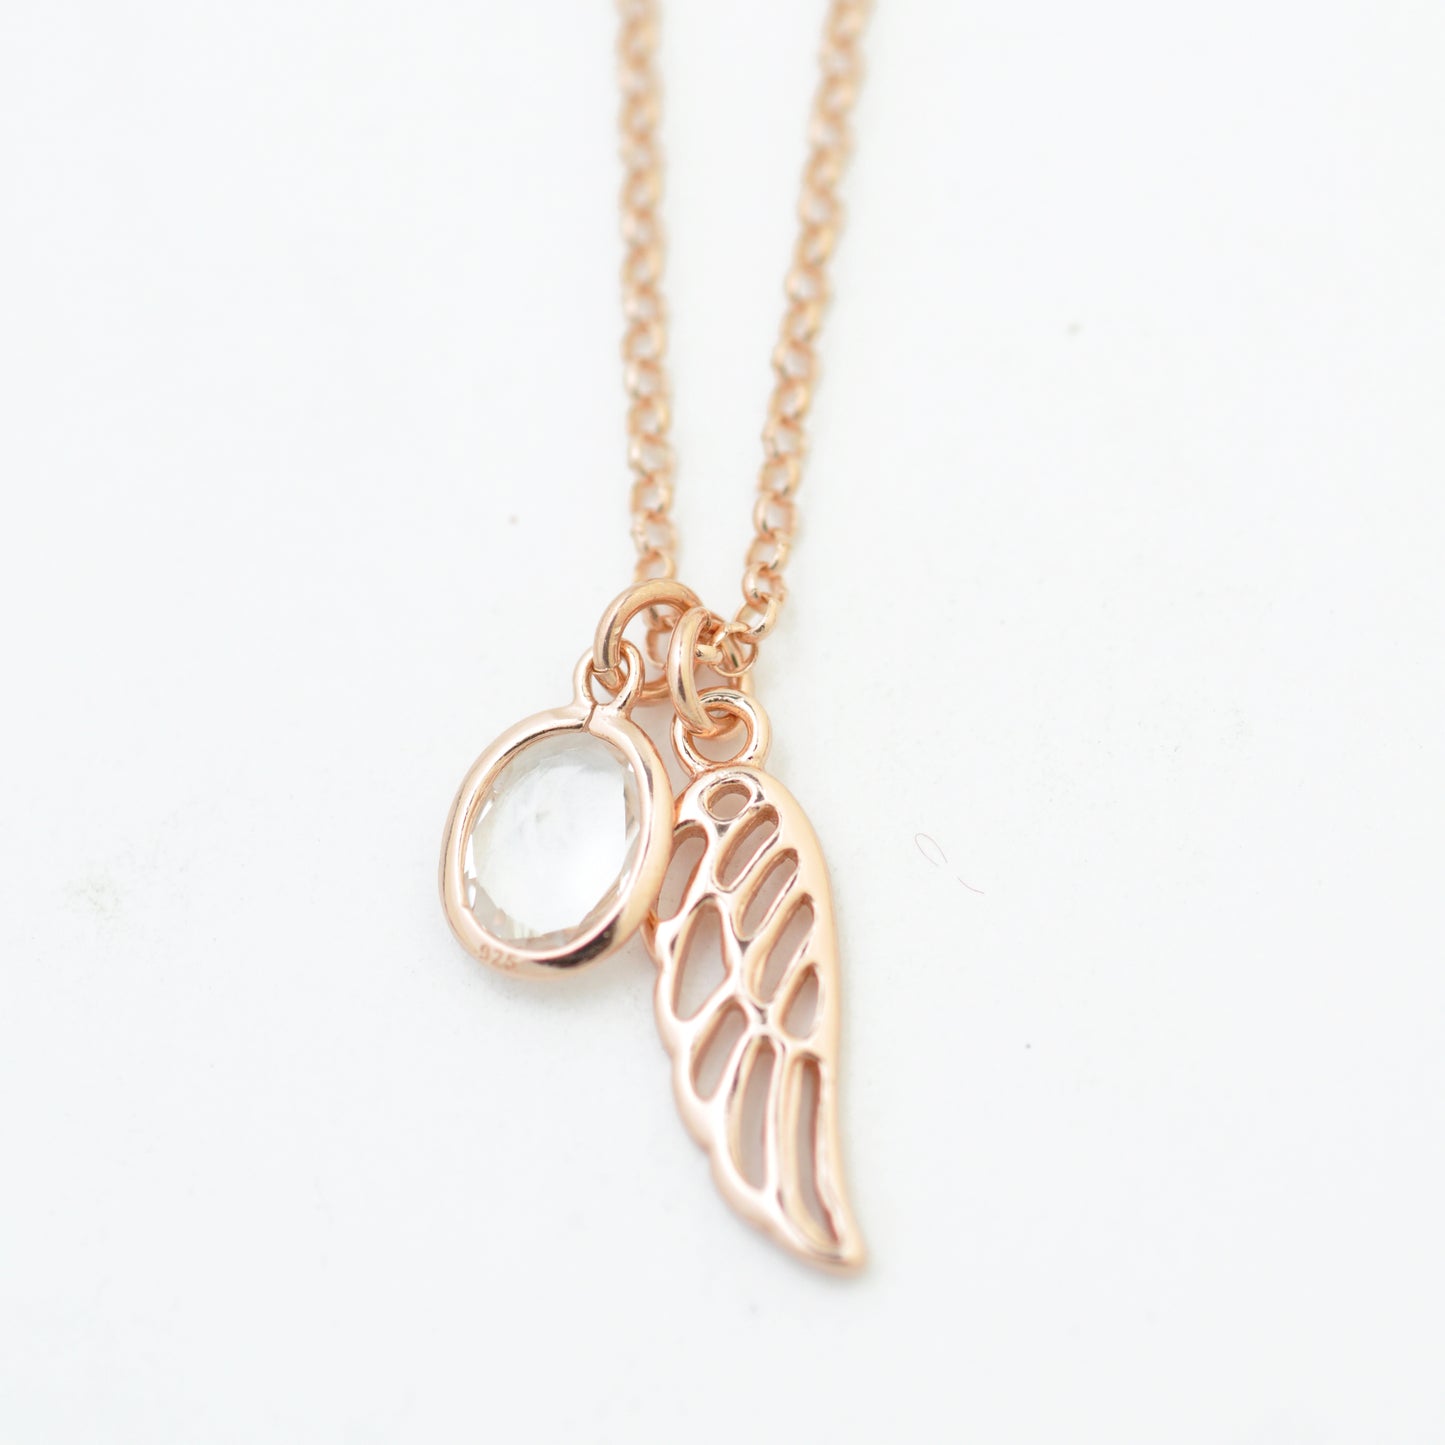 Angel wing chain - 925 sterling silver - 42 cm